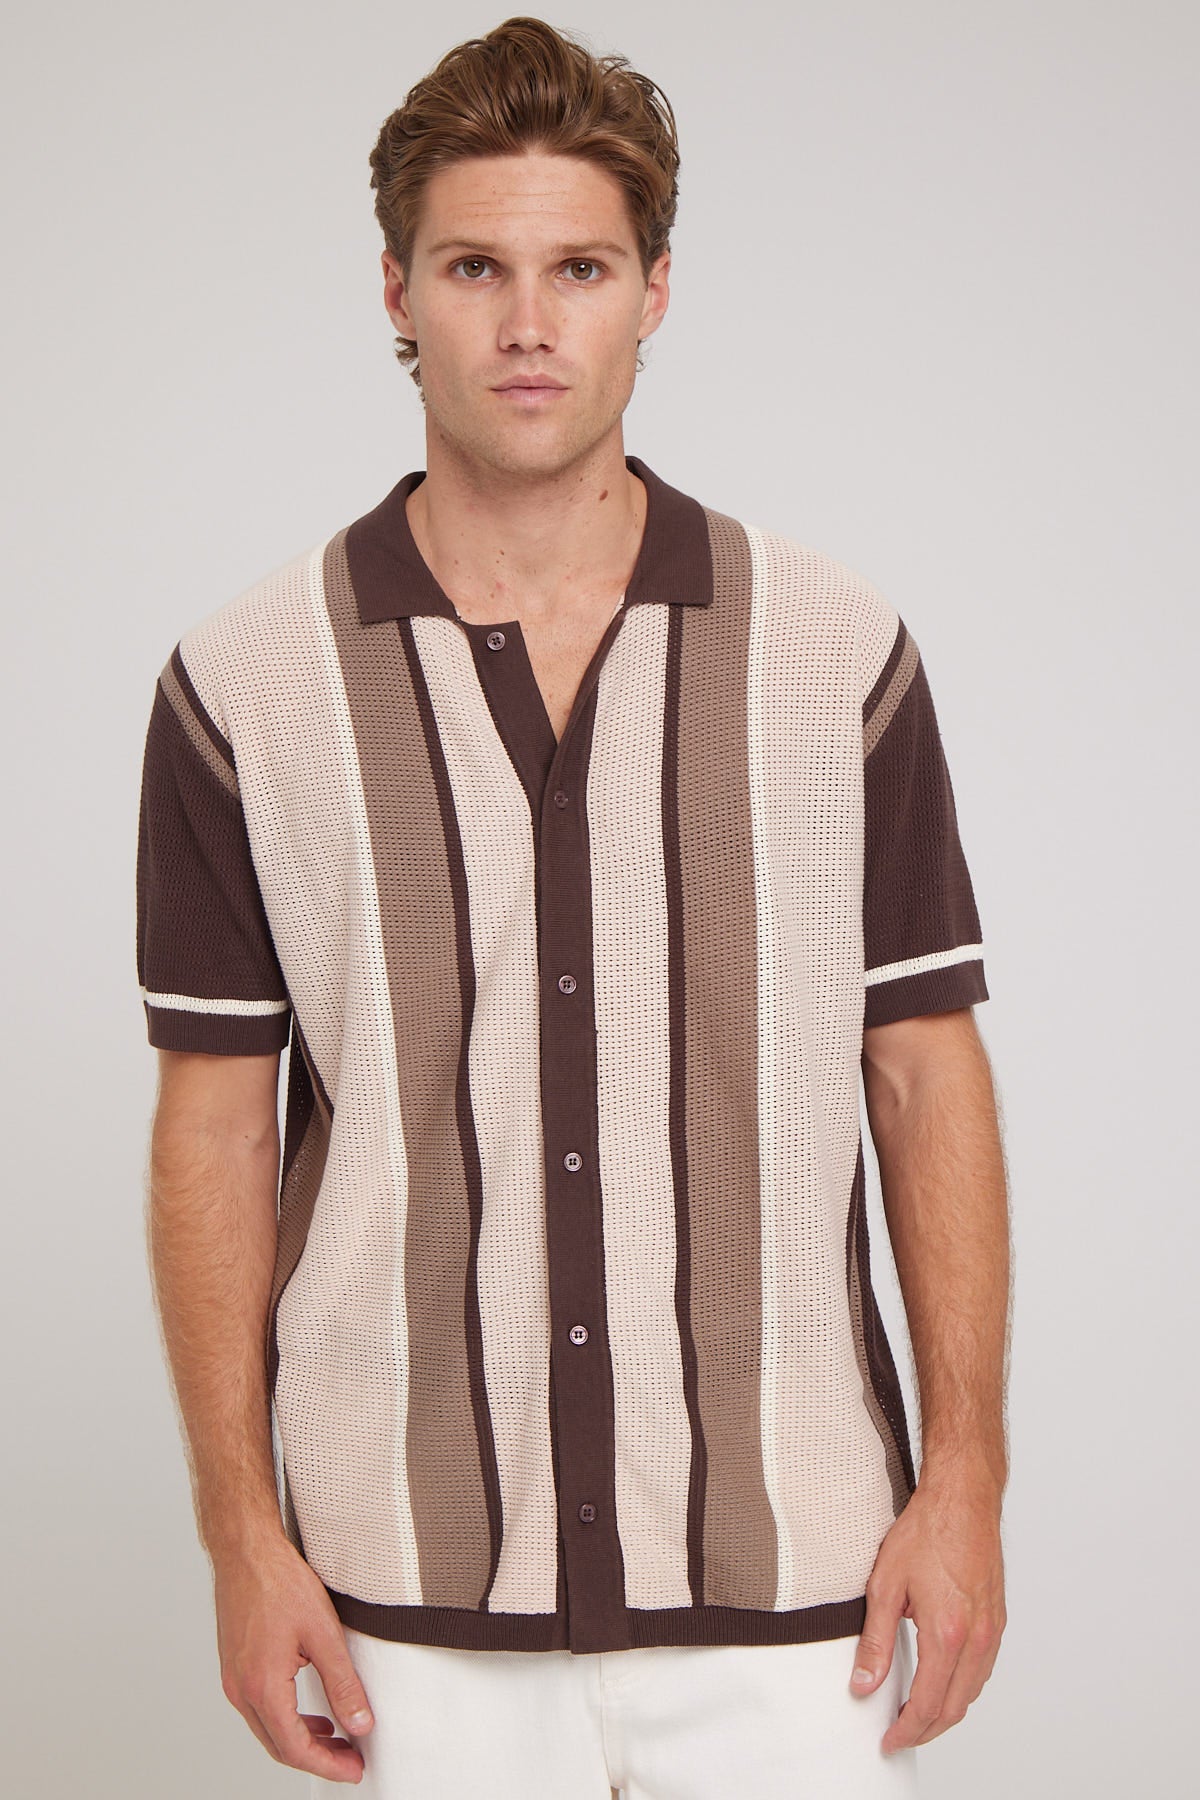 Common Need Vacation Knit Shirt Brown Stripe